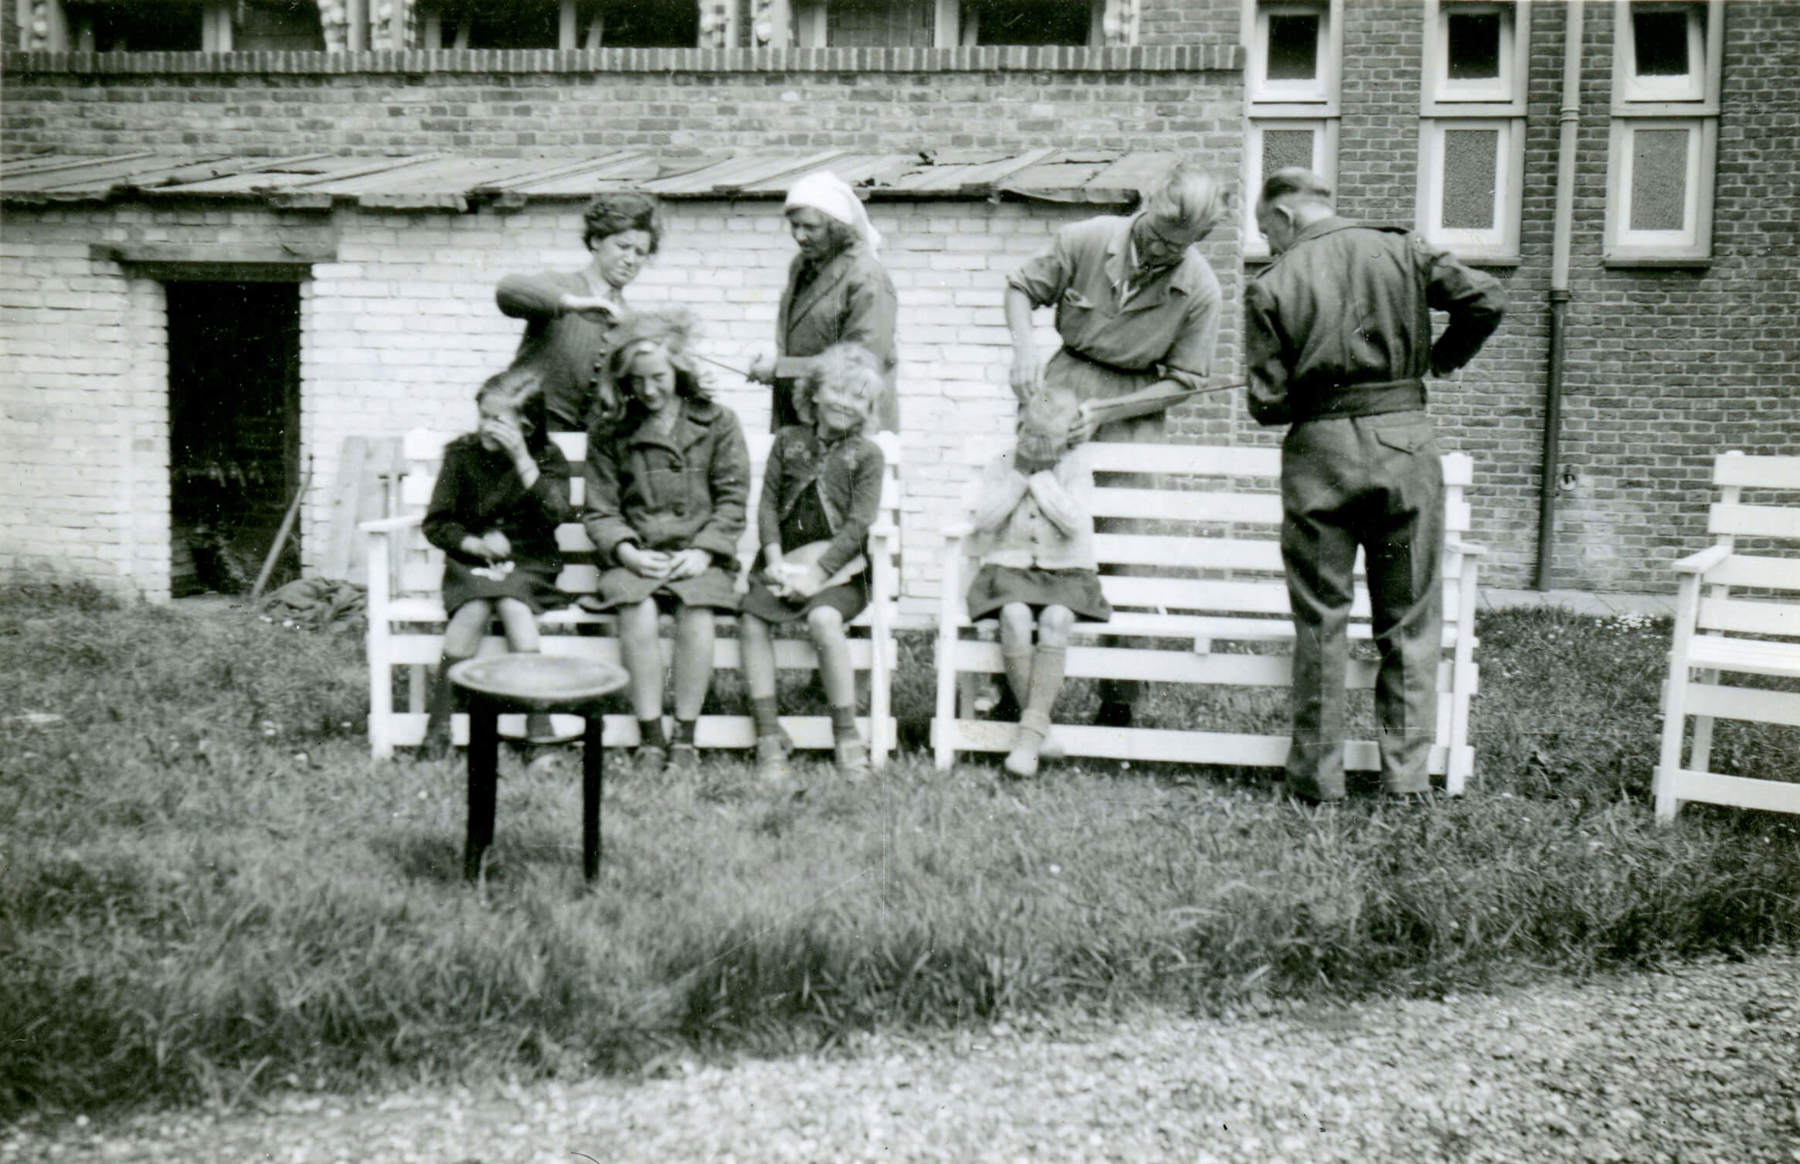 Black and white photo of four people sitting on benches having their hair checked for lice by four people standing behind them